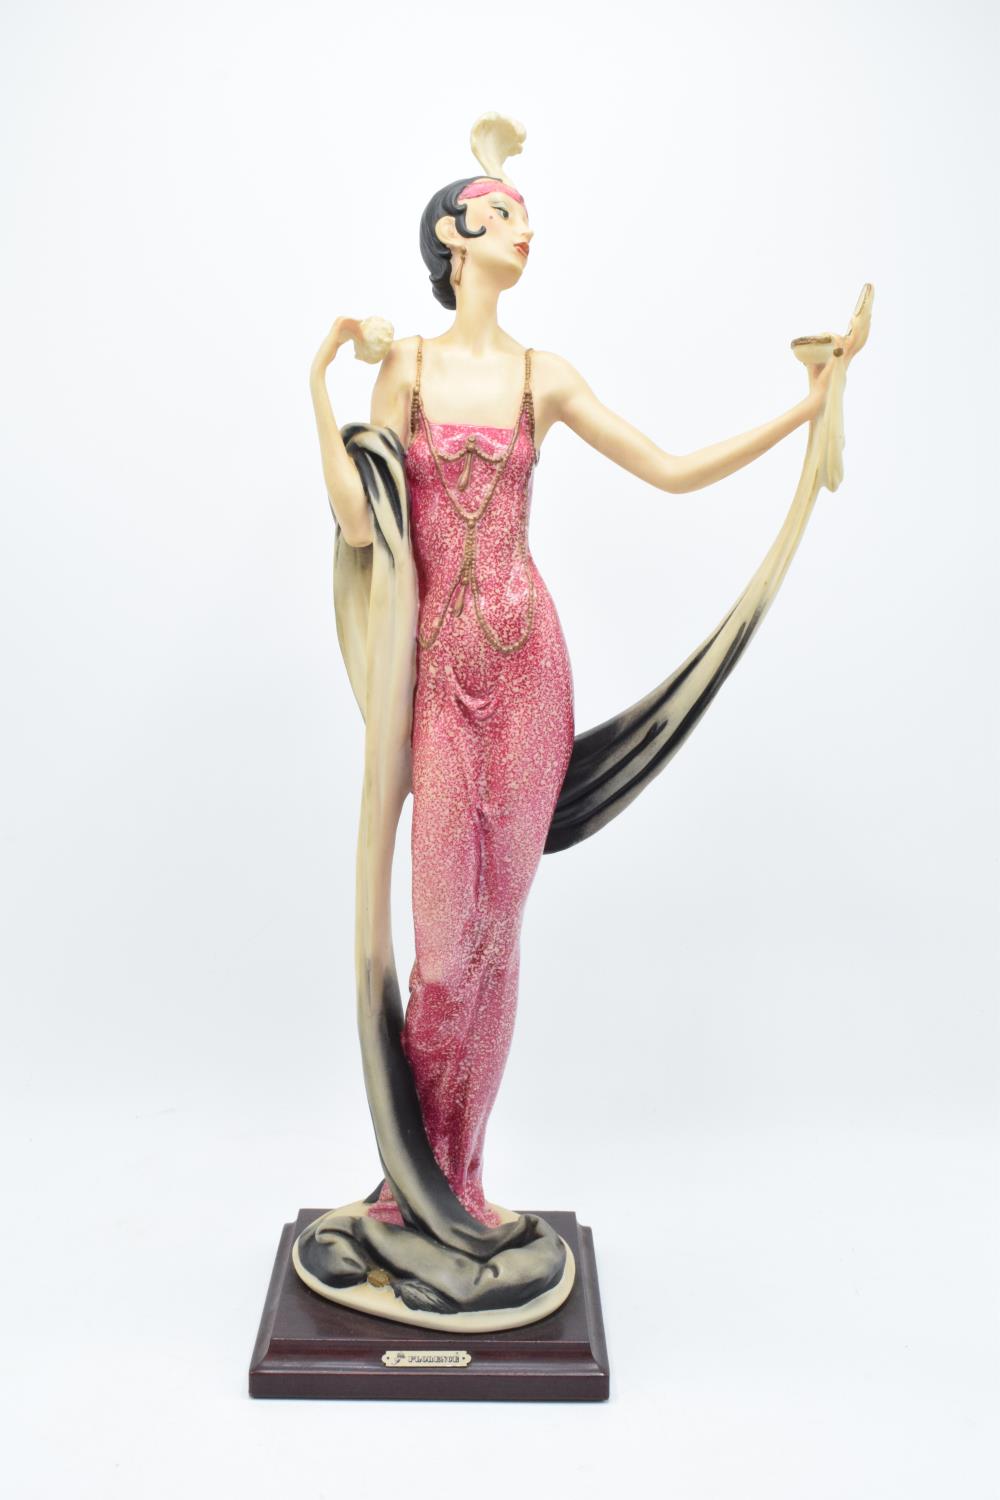 Giuseppe Armani Figurine "Lady with Compact" Mounted on Wooden Base, 1987 Limited Edition My Fair